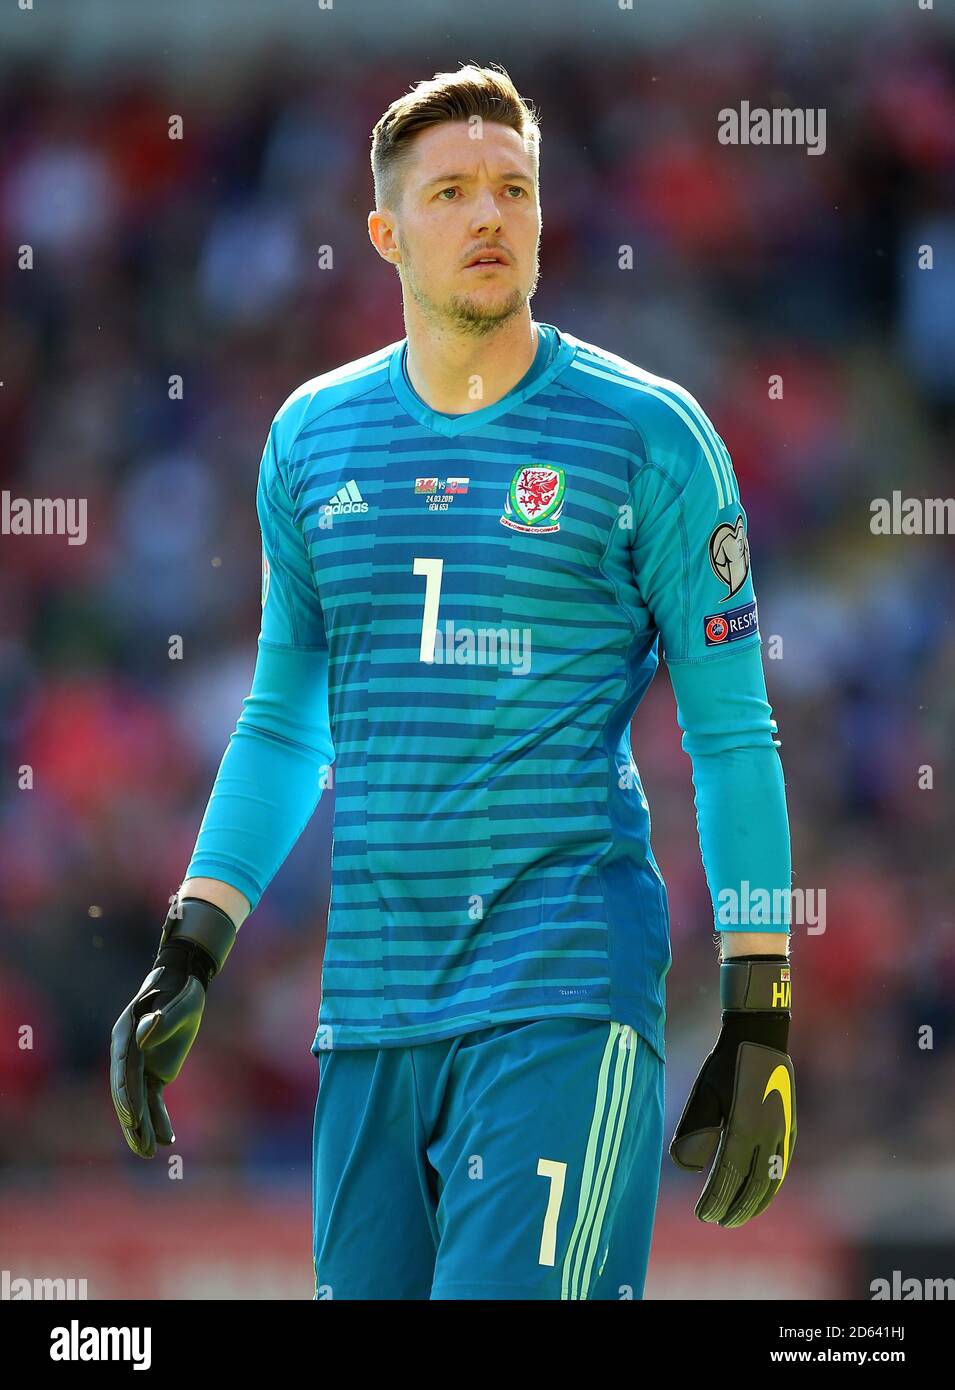 In Galles il portiere Wayne Hennessey Foto stock - Alamy